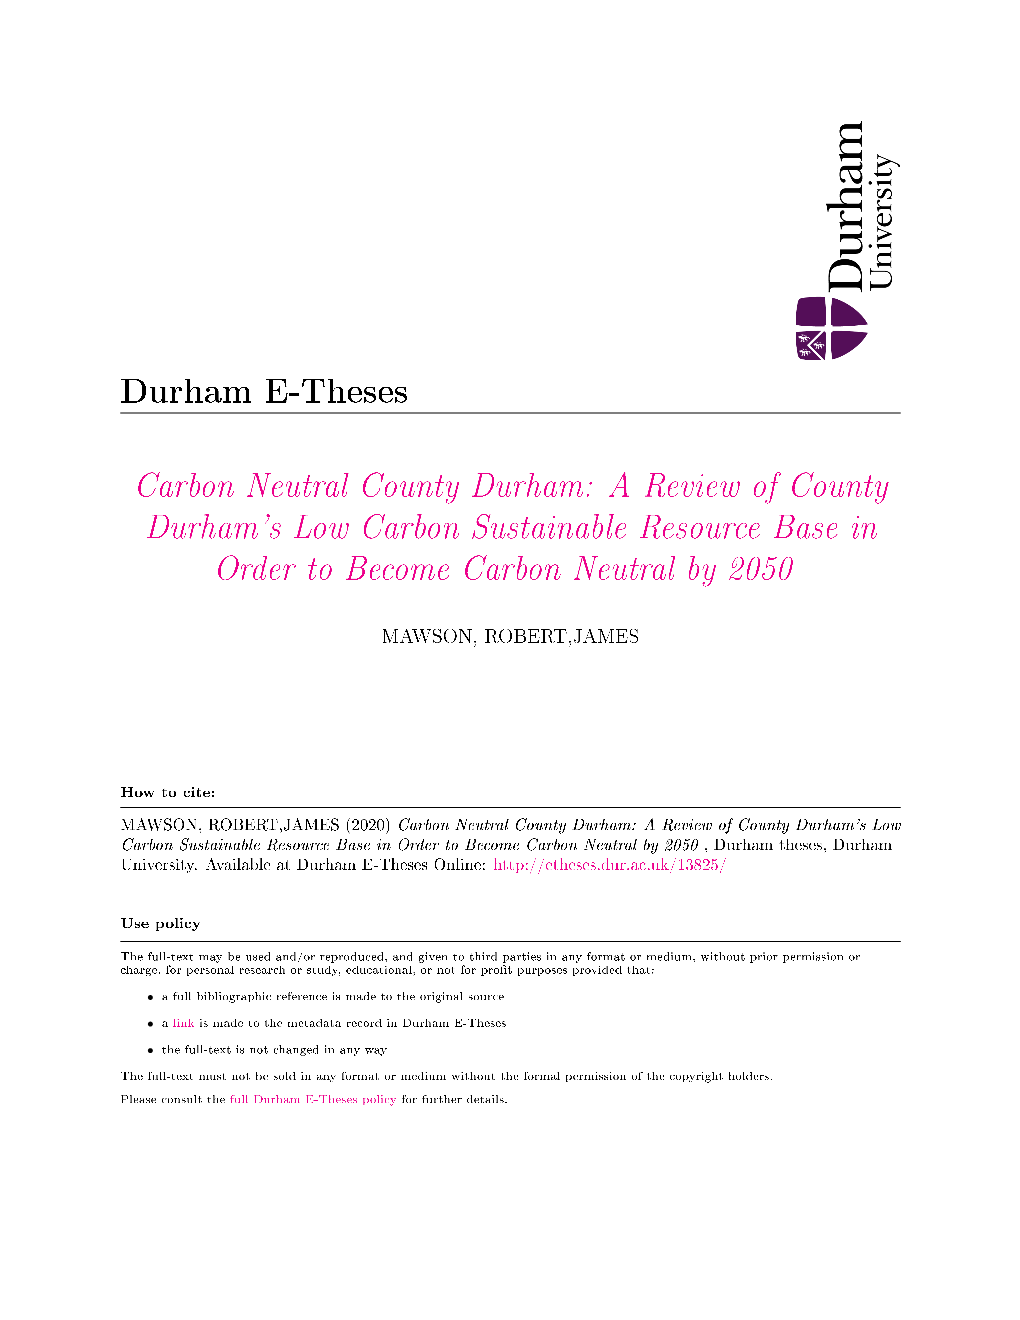 A Review of County Durham's Low Carbon Sustainable Resource Base in Order to Become Carbon Neutral by 2050